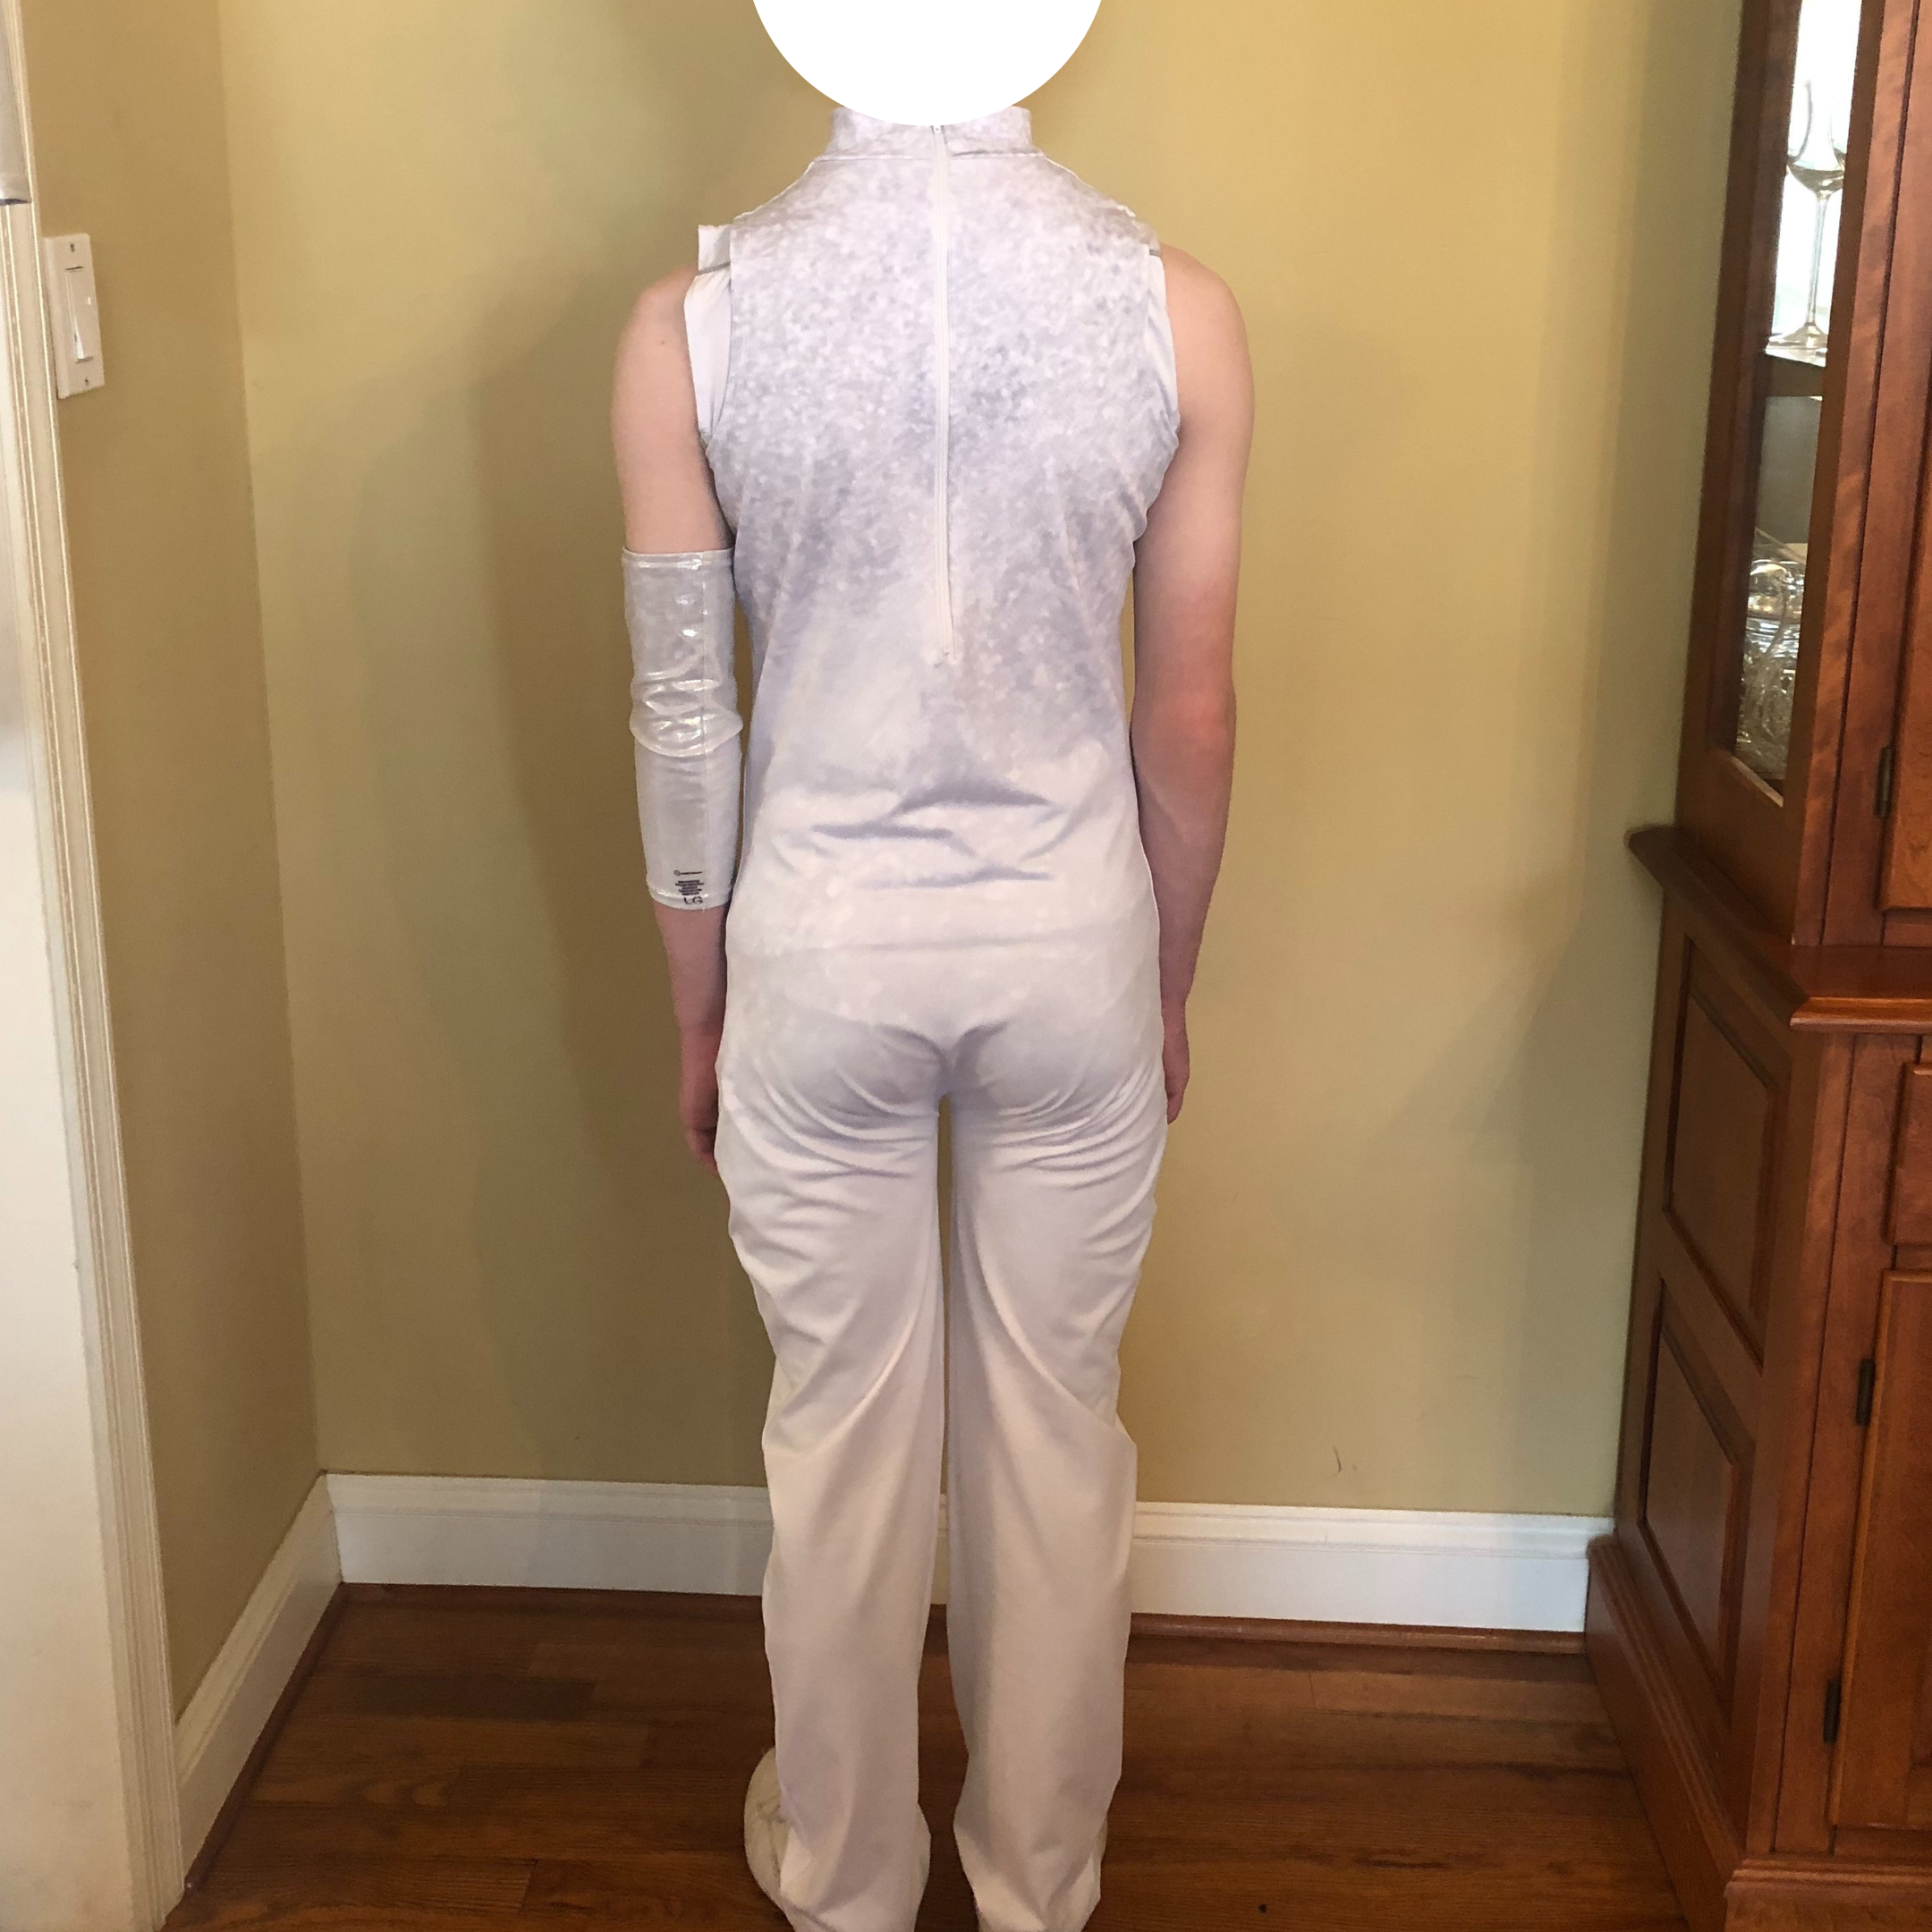 Synced Up Designs Custom White/Silver Unitards with Glitterfoil Jackets and Armbands (Set of 36)